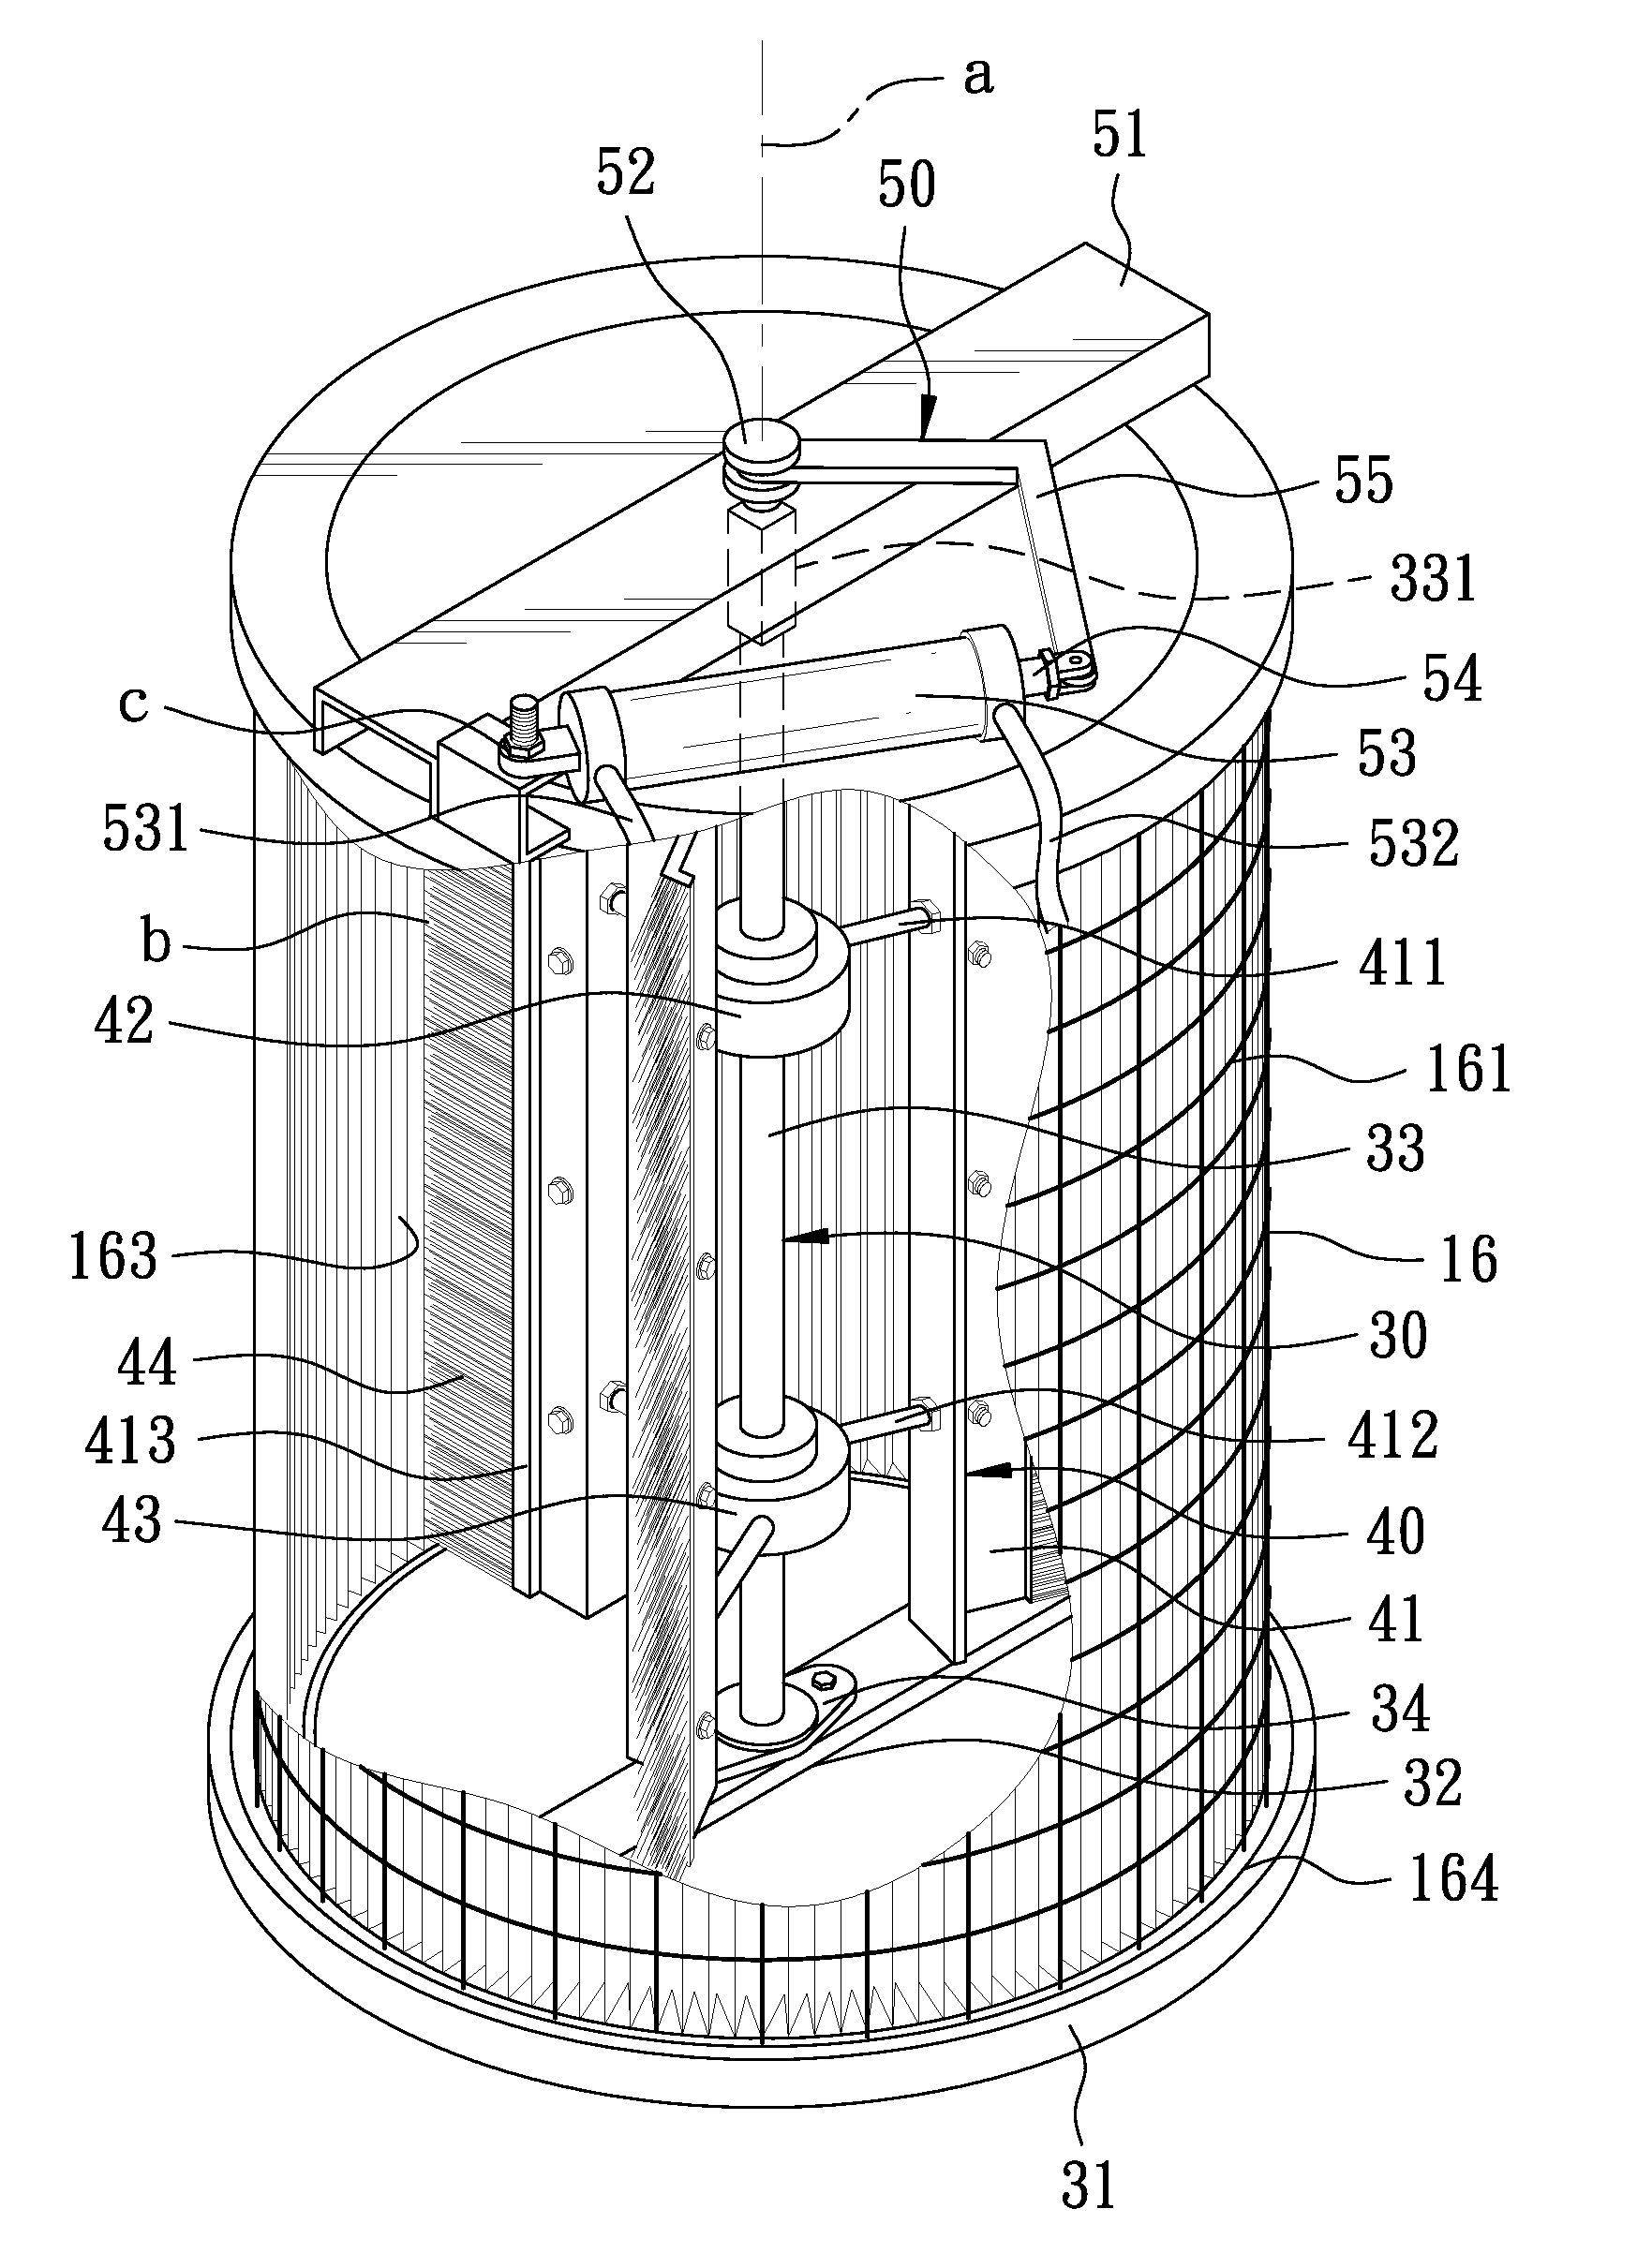 Automatic dust debris clearing apparatus for a filter drum in a dust collector